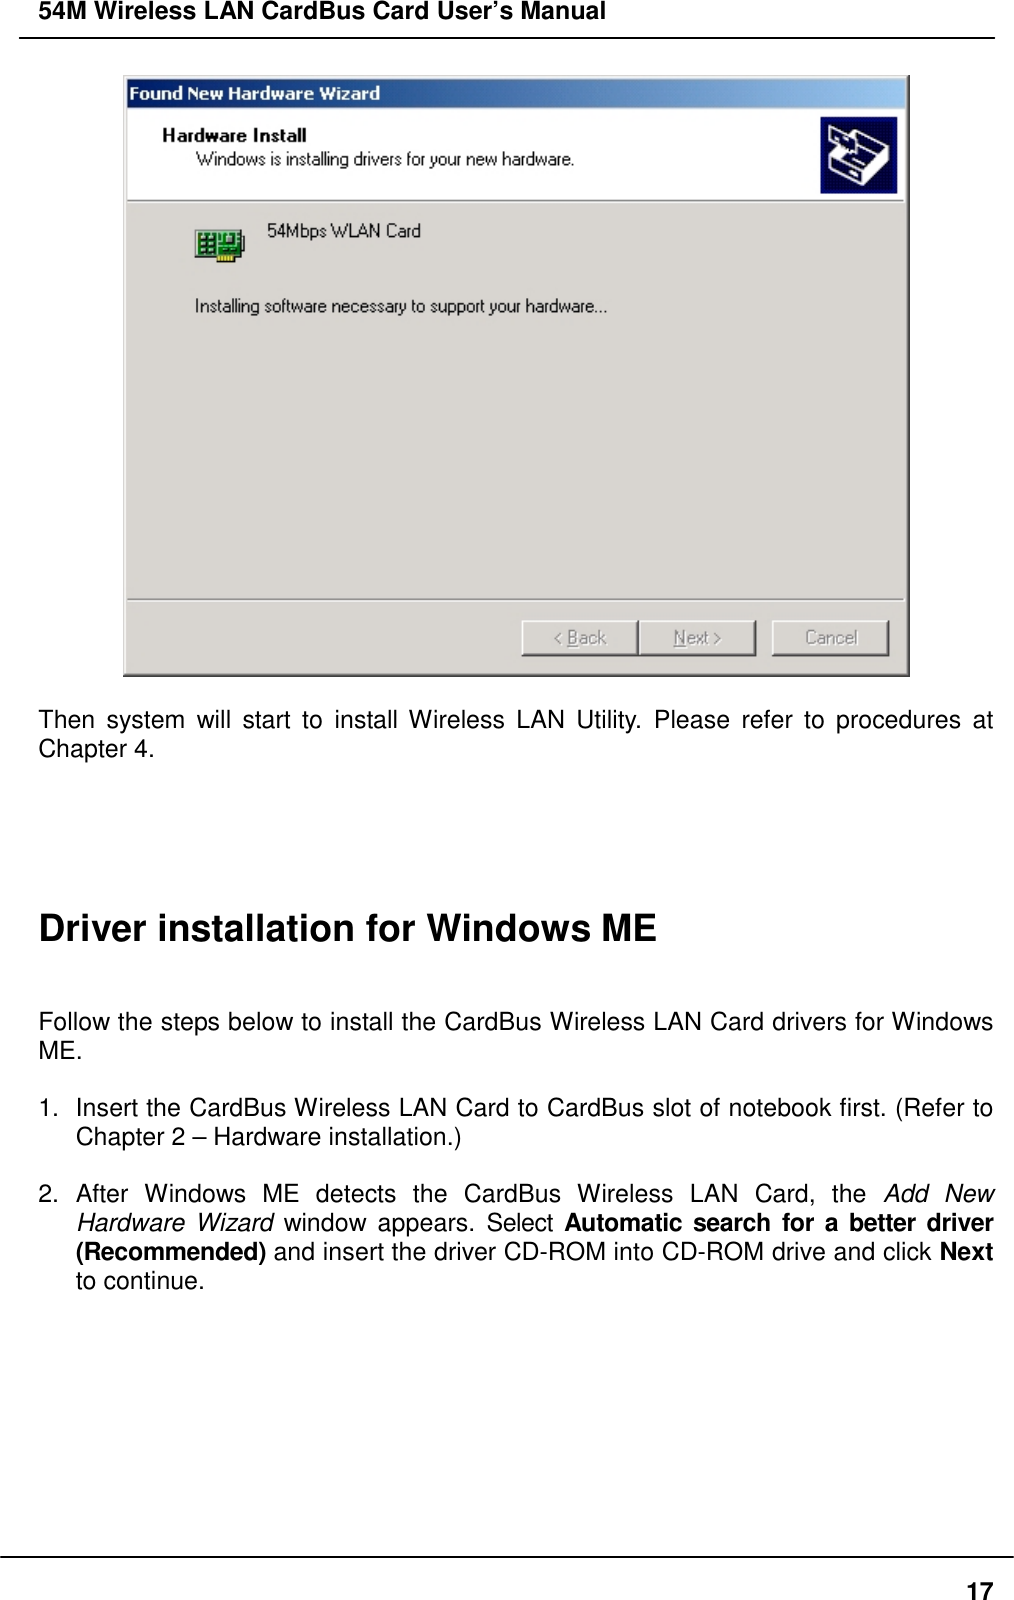 54M Wireless LAN CardBus Card User’s Manual17Then system will start to install Wireless LAN Utility. Please refer to procedures atChapter 4.Driver installation for Windows MEFollow the steps below to install the CardBus Wireless LAN Card drivers for WindowsME.1.  Insert the CardBus Wireless LAN Card to CardBus slot of notebook first. (Refer toChapter 2 – Hardware installation.)2. After Windows ME detects the CardBus Wireless LAN Card, the Add NewHardware Wizard window appears. Select Automatic search for a better driver(Recommended) and insert the driver CD-ROM into CD-ROM drive and click Nextto continue.